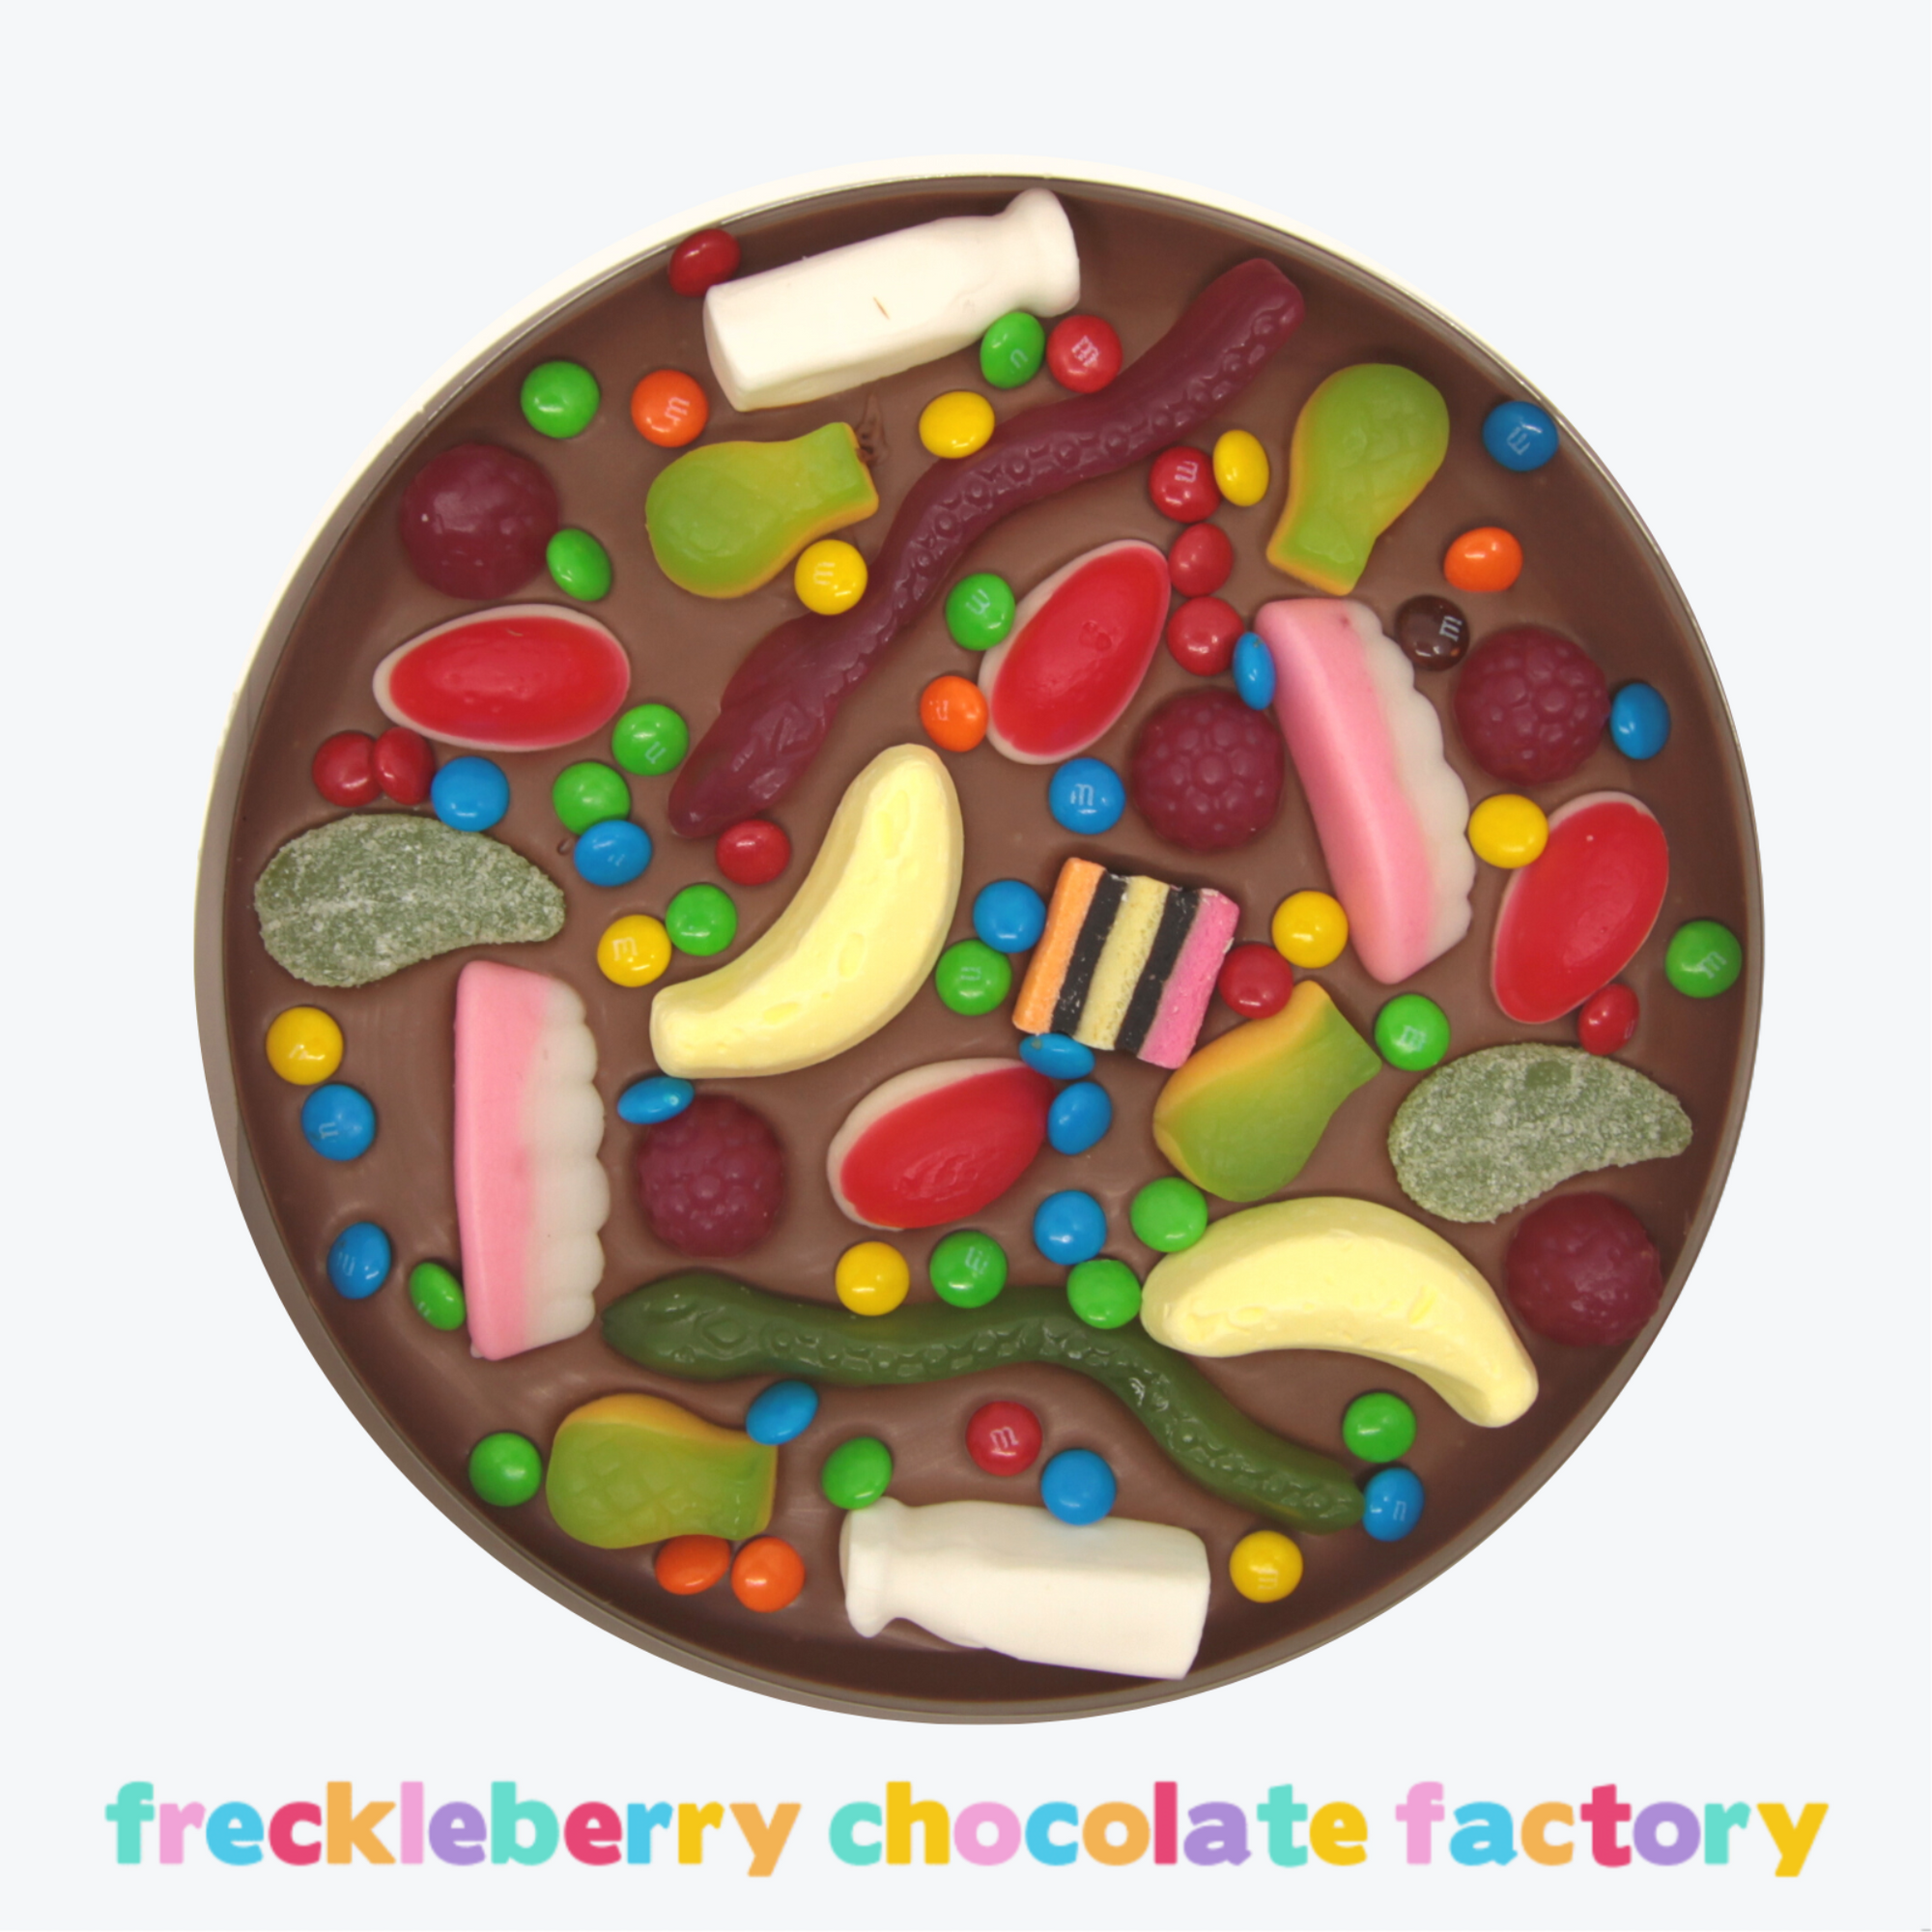 Freckleberry - Giant Lolly Pizza - No Front Label